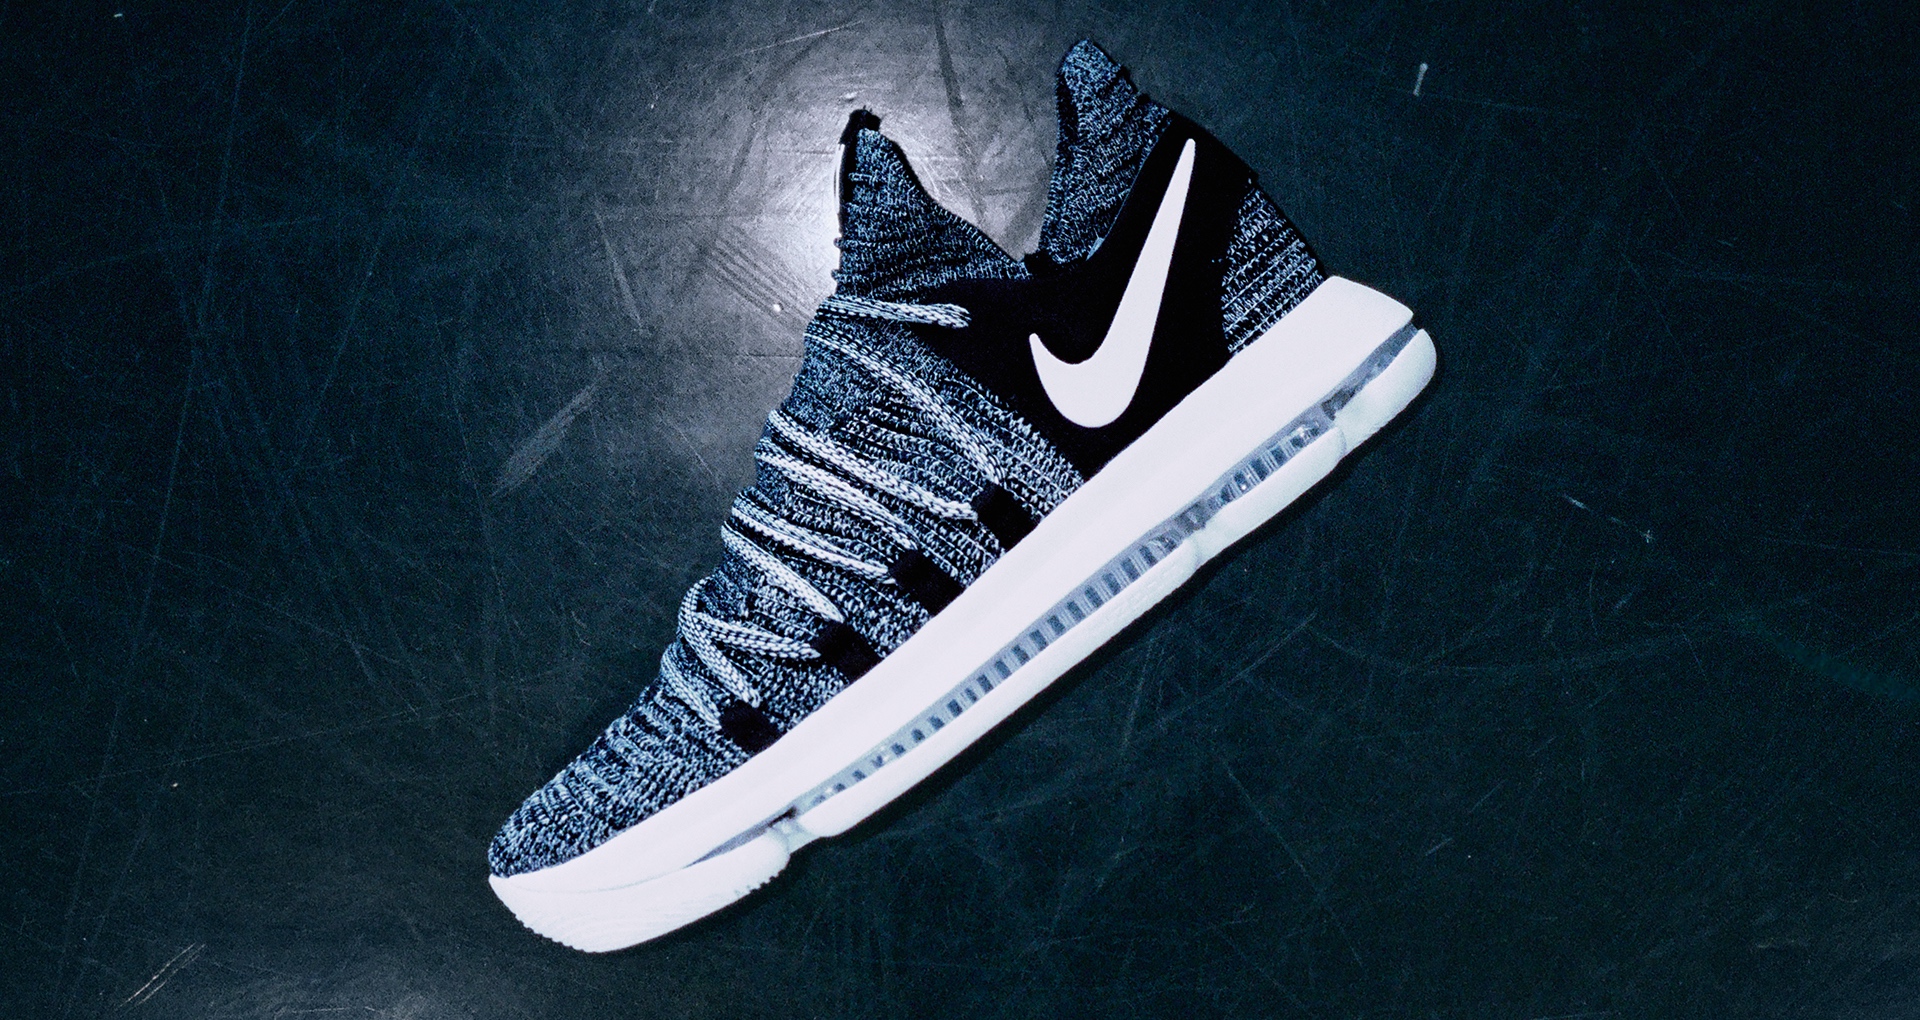 kd 10 performance review